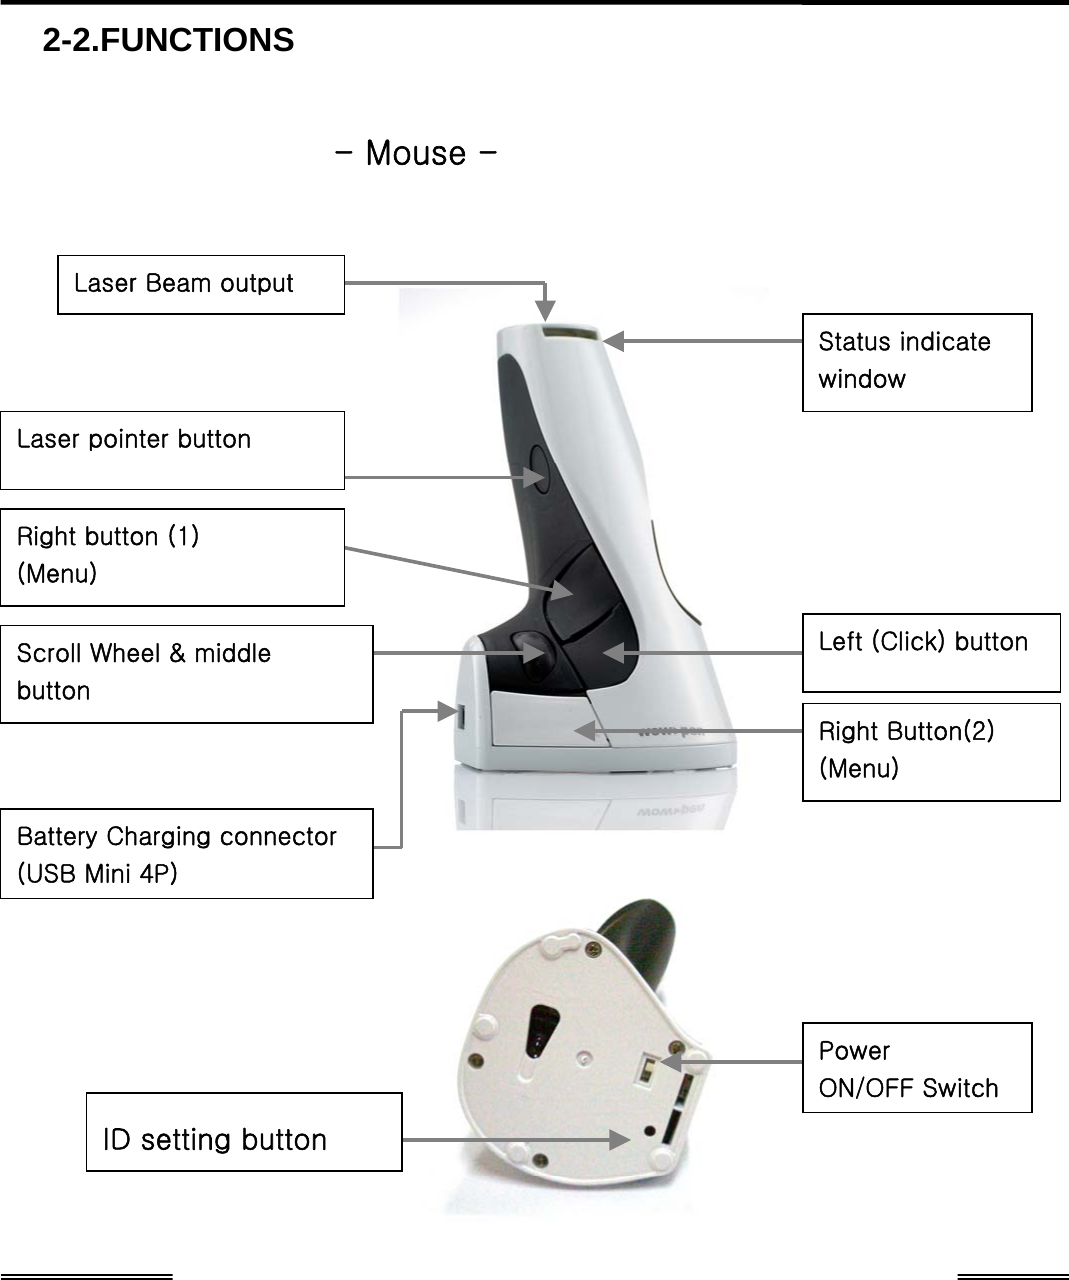   62-2.FUNCTIONS   - Mouse -               Laser Beam output Laser pointer button Right button (1) (Menu) Left (Click) buttonScroll Wheel &amp; middle button Battery Charging connector (USB Mini 4P) Power ON/OFF SwitchID setting button Right Button(2) (Menu) Status indicate window   